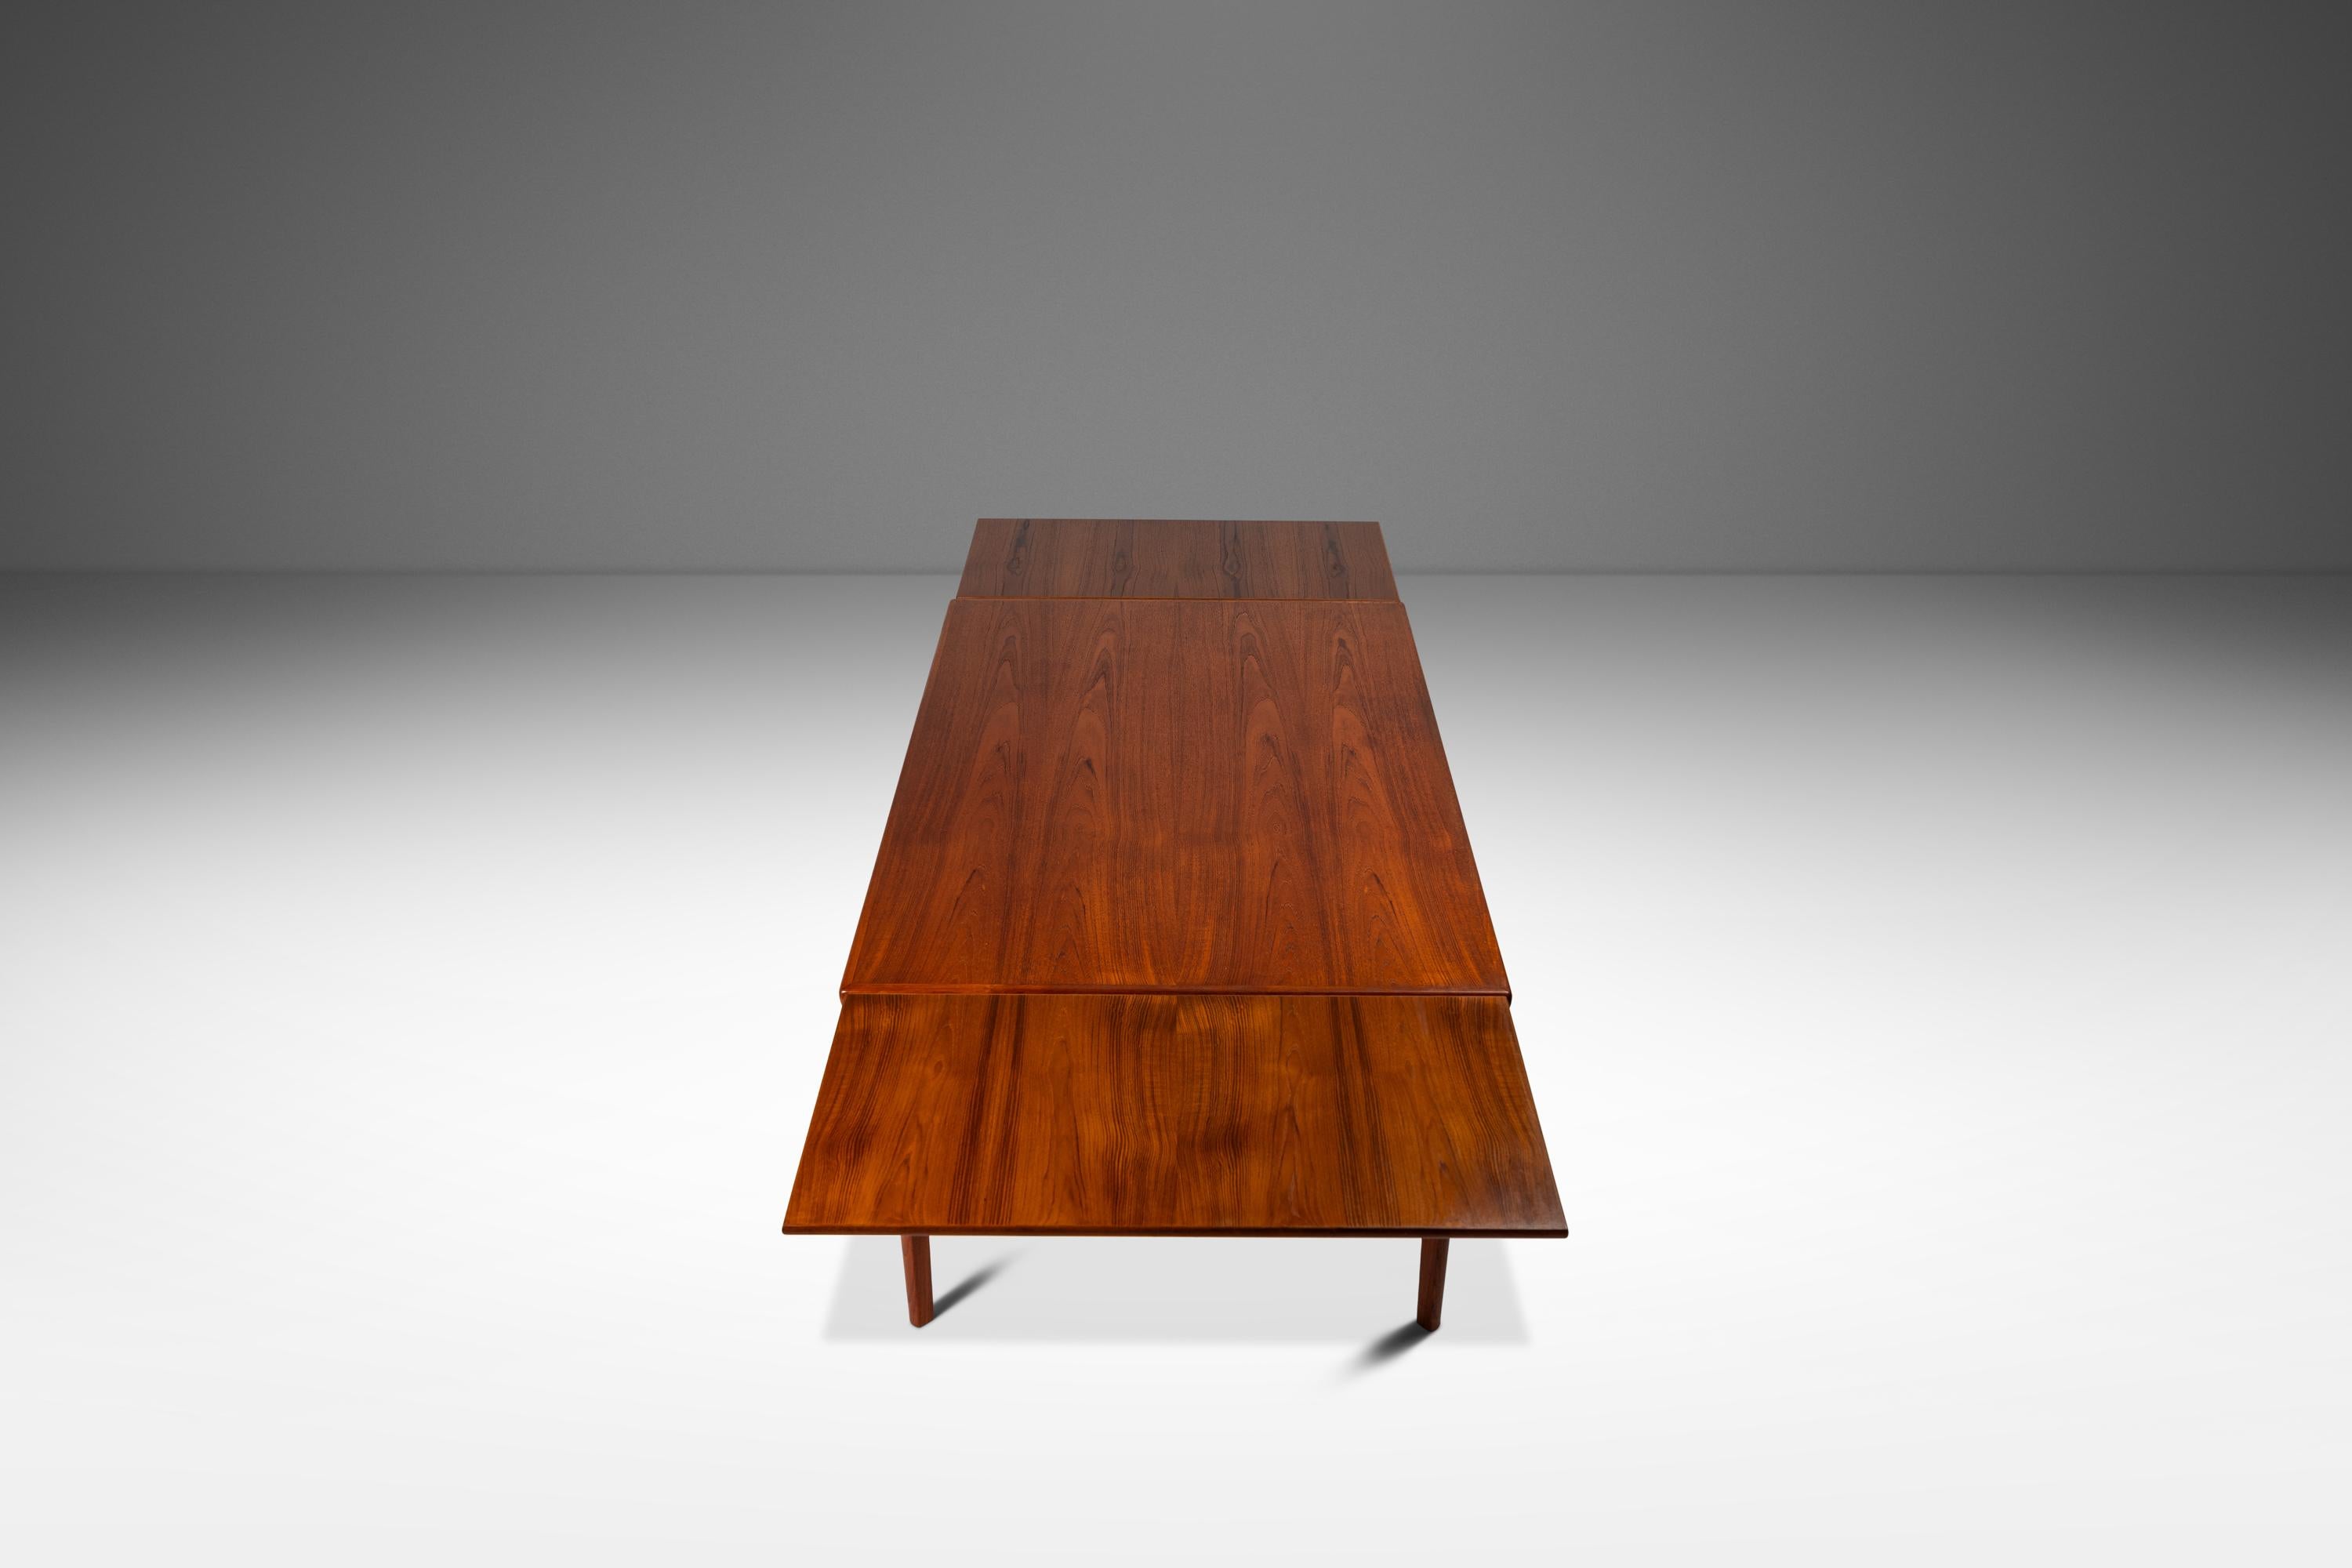 Teak Expansion Dining Table w/ Stow-in Leaves by BRDR Furbo, Denmark, c. 1960s In Good Condition For Sale In Deland, FL